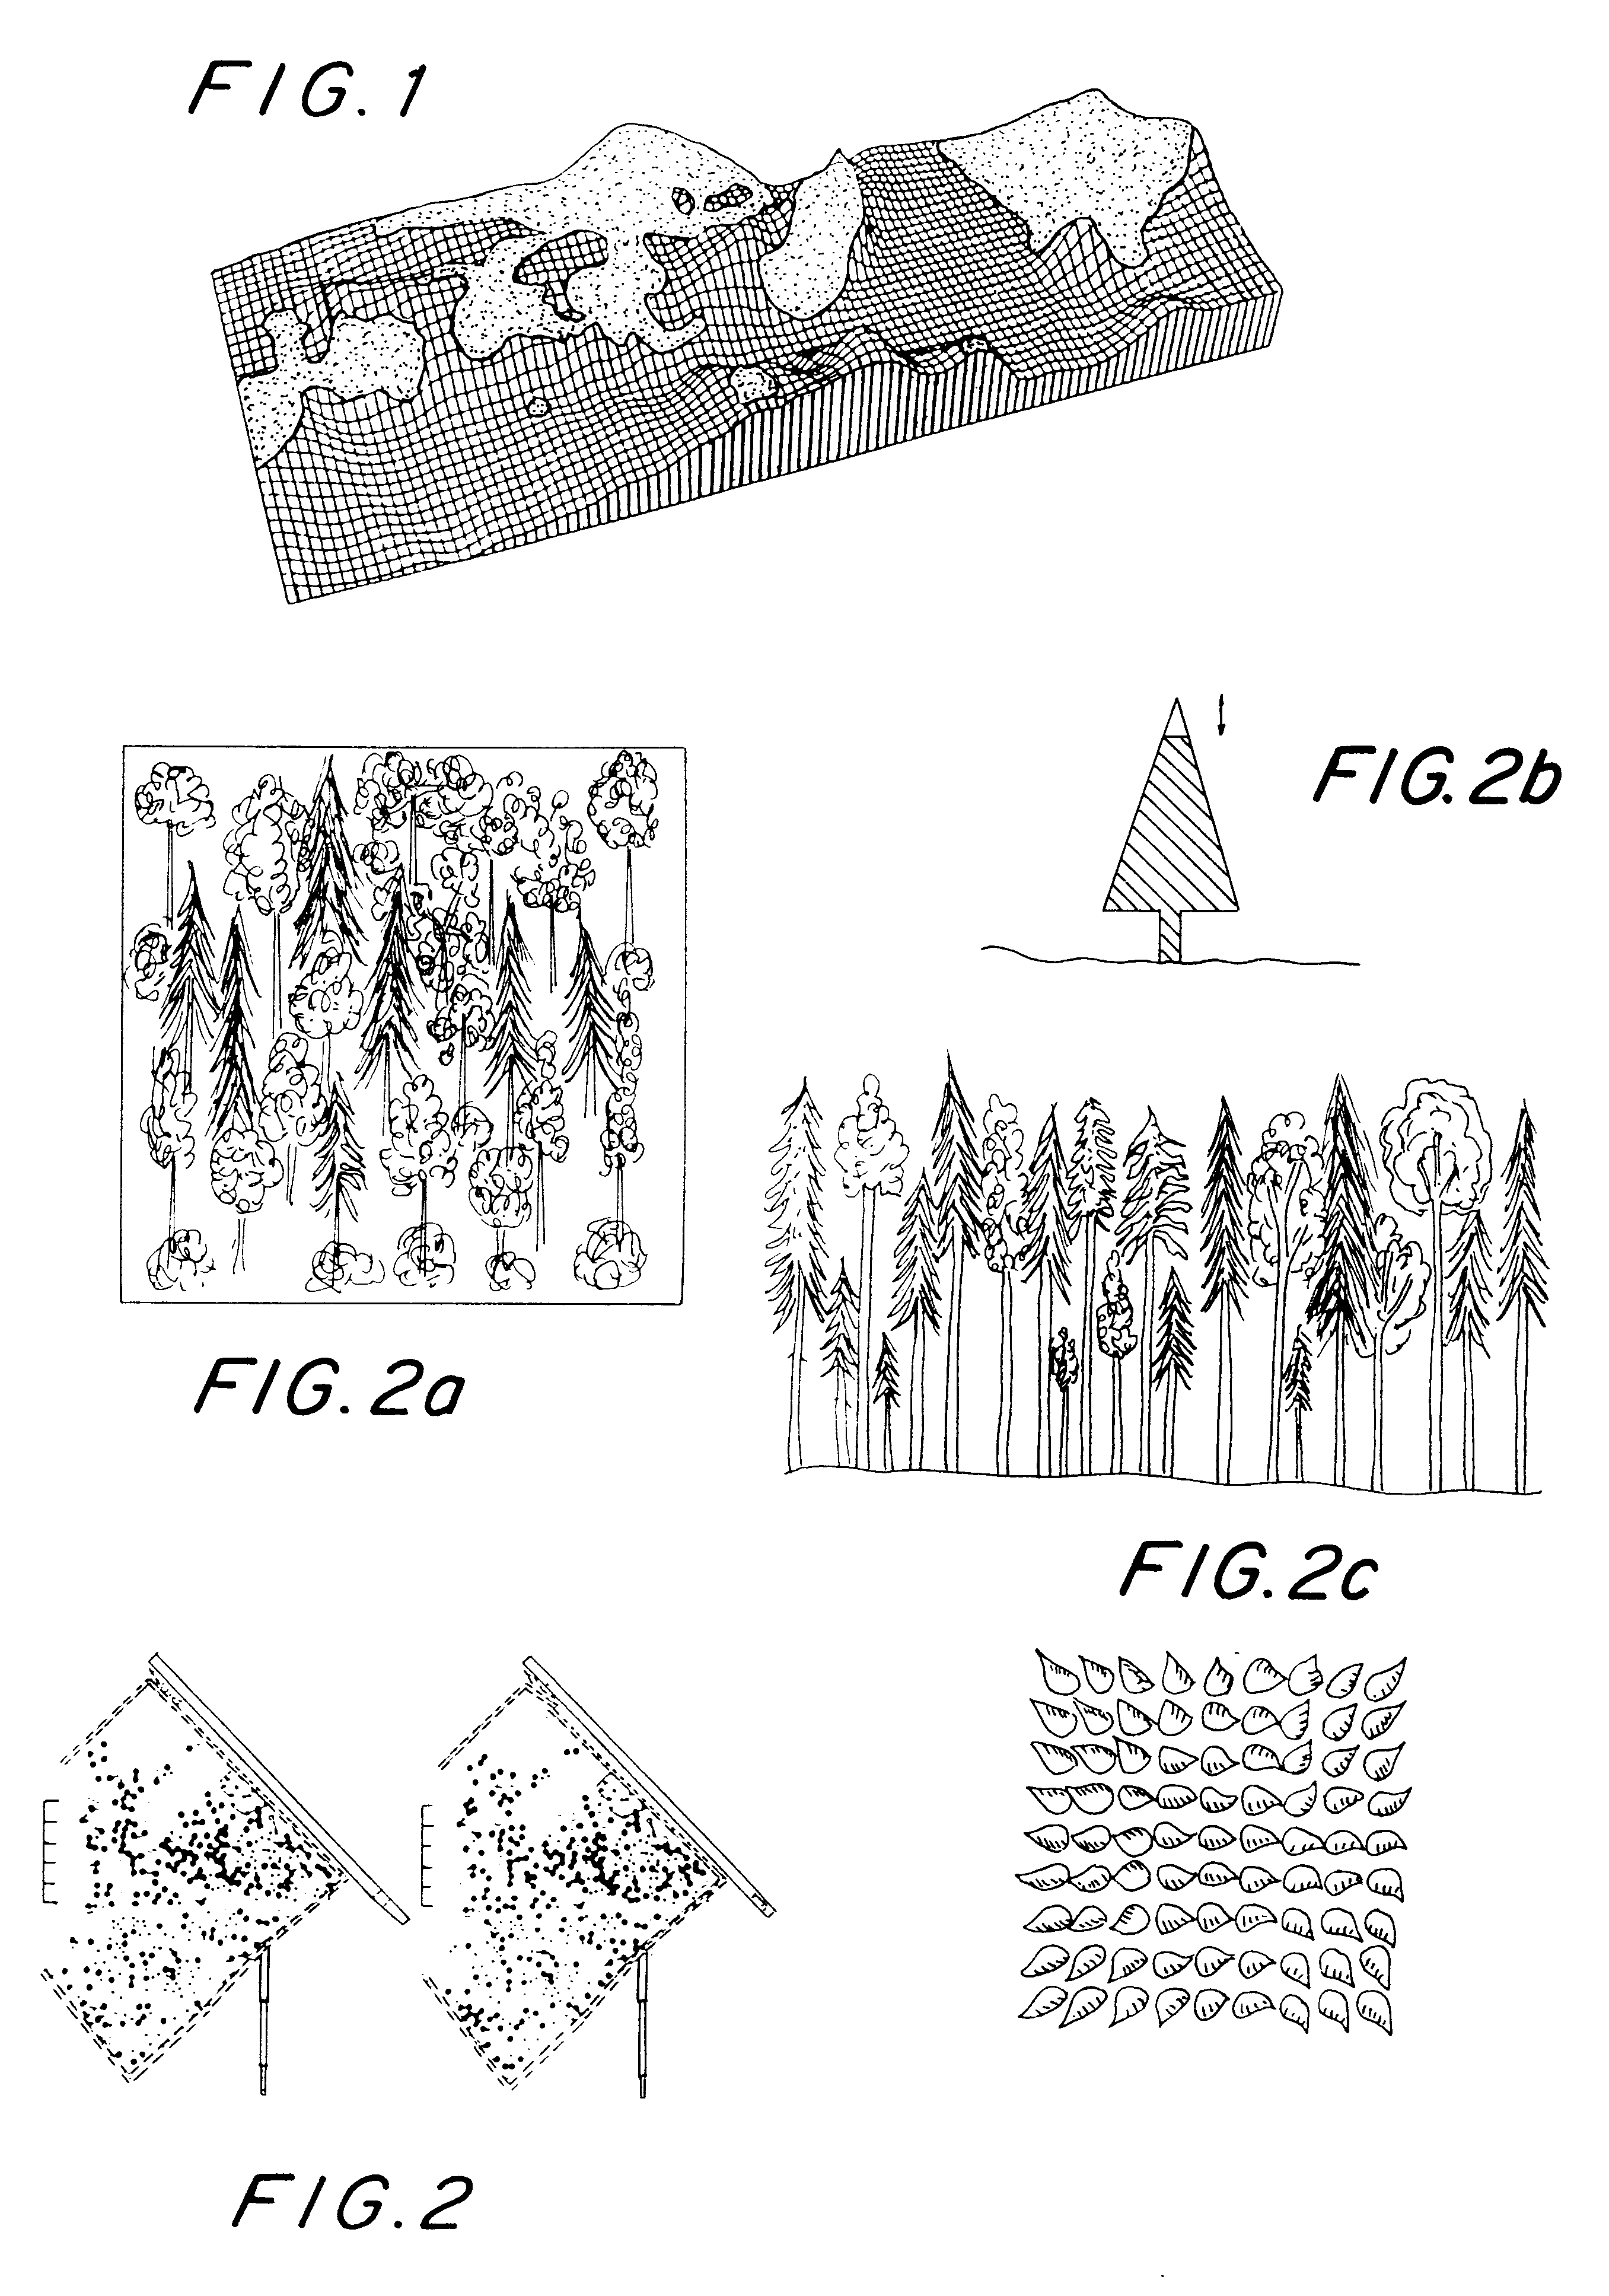 Method for timber harvesting and system for forestry